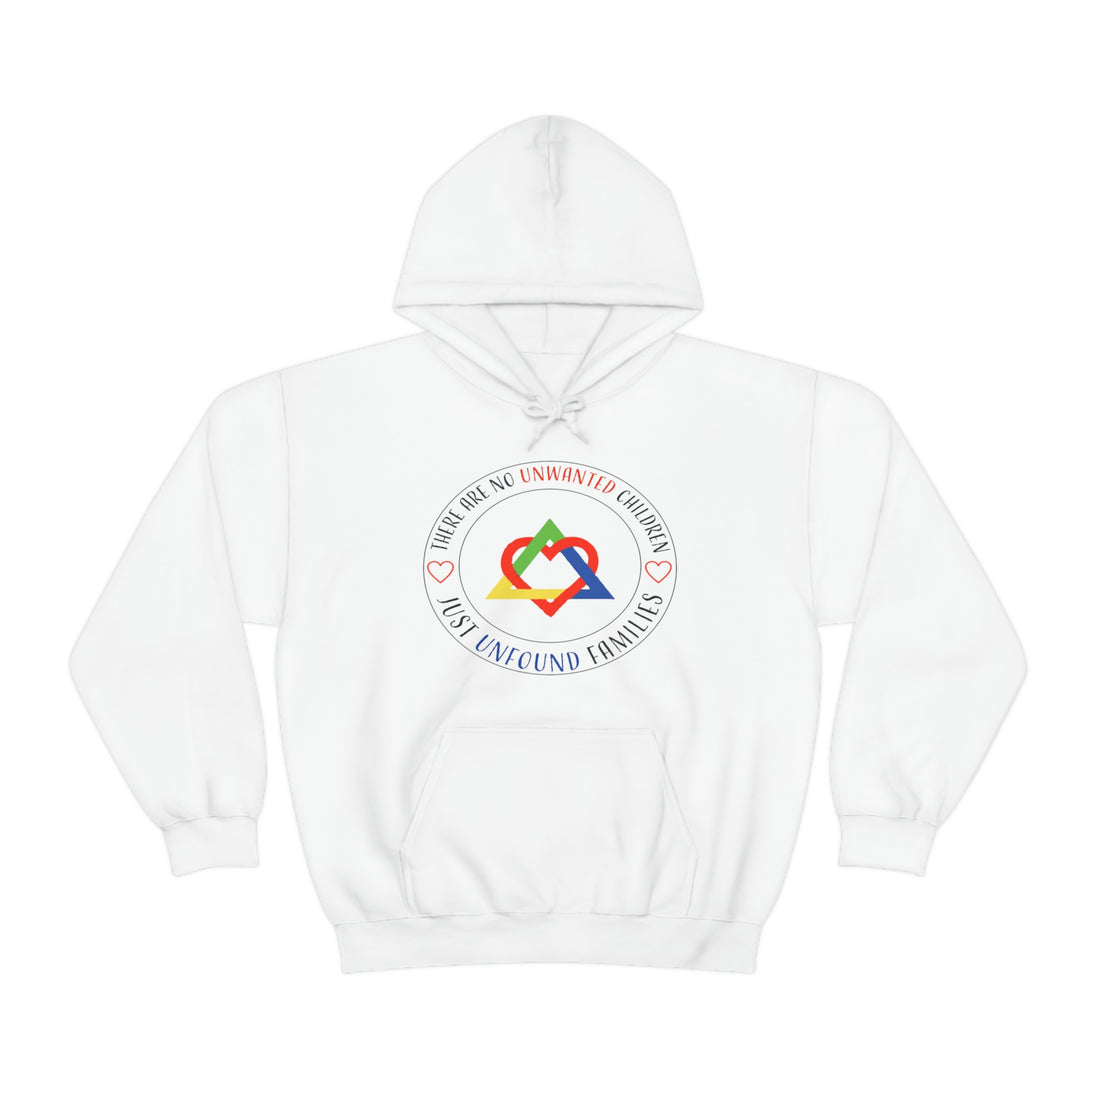 There Are No Unwanted Children Only Unfound Families - Unisex Heavy Blend™ Hooded Sweatshirt